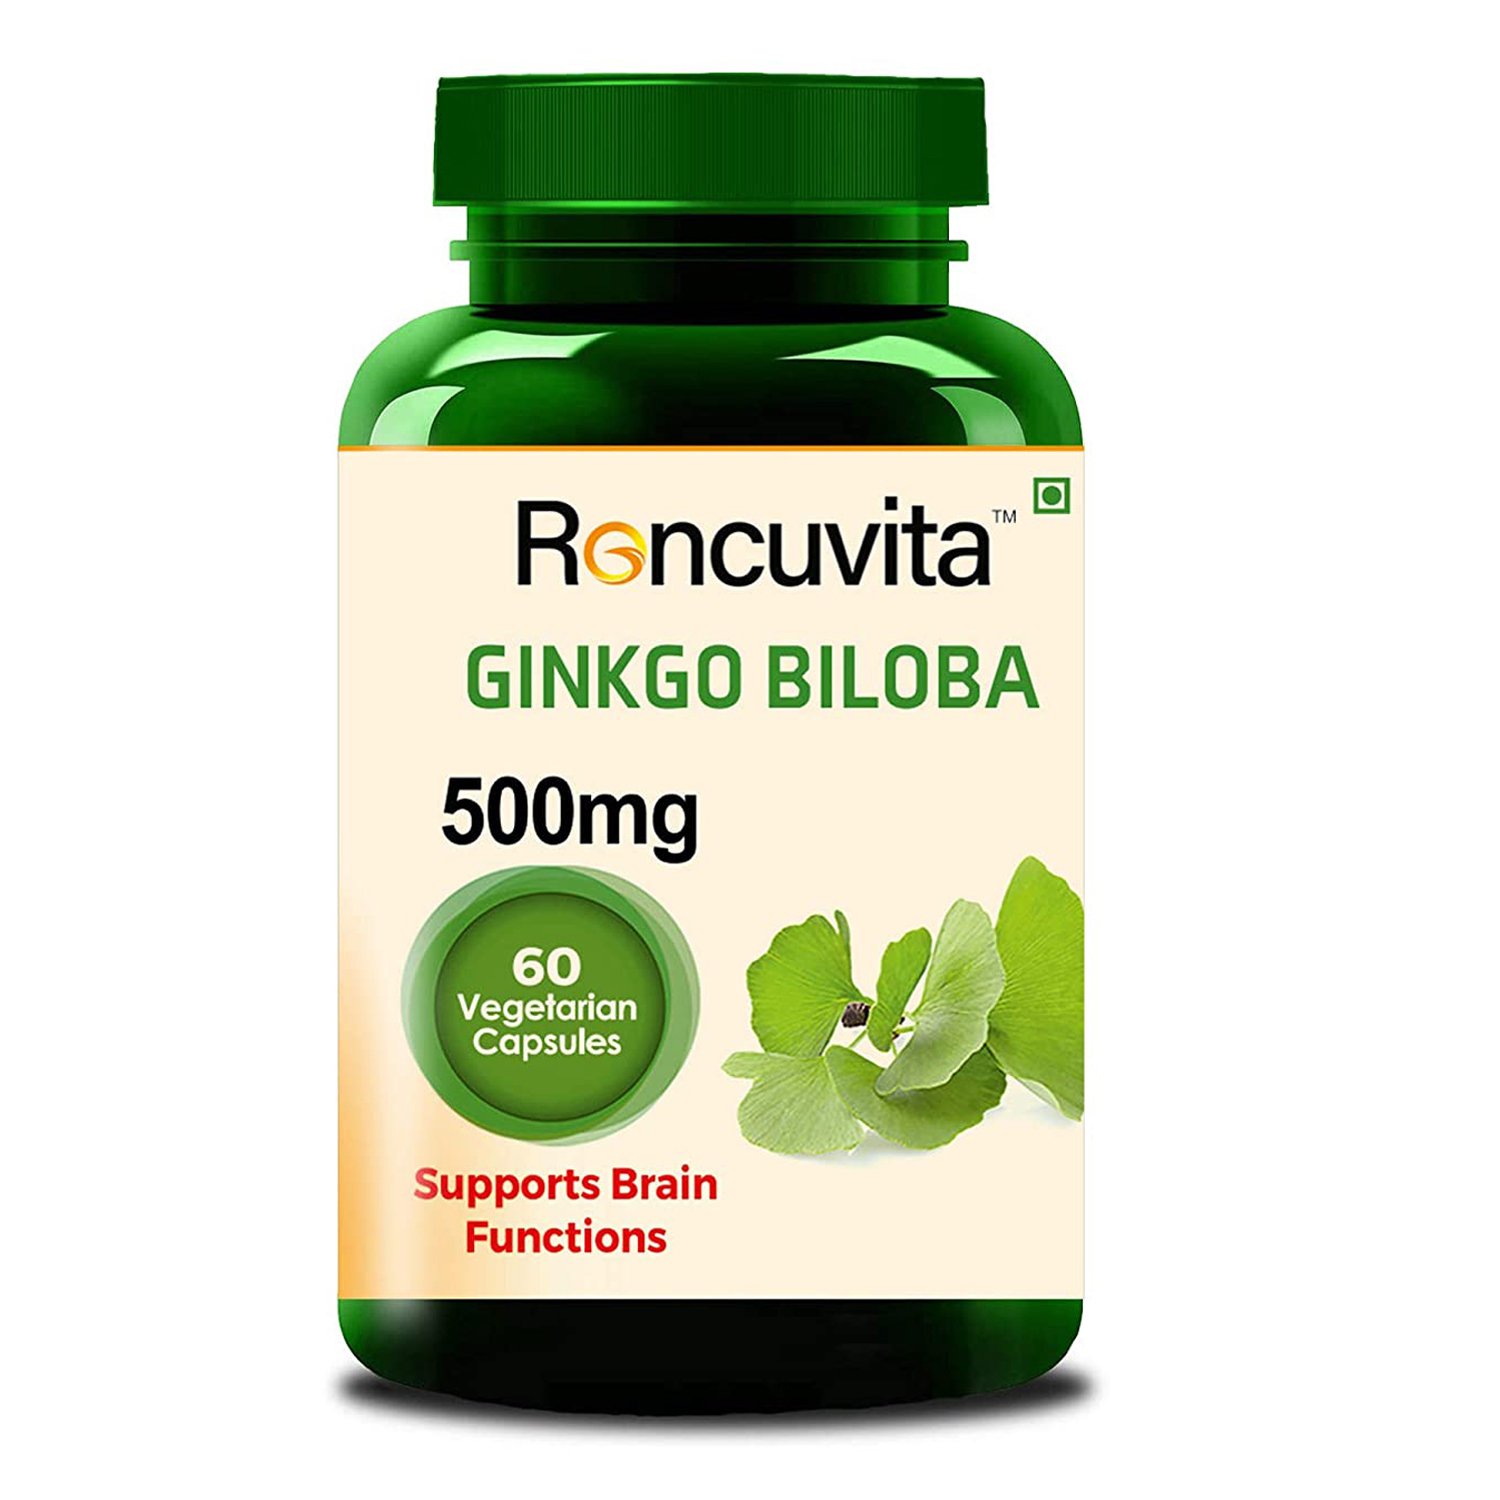 Buy 500mg Ginkgo Biloba Capsules as a energy booster [Roncuvita]Health and BeautyHealth Care ProductsAll IndiaAirport